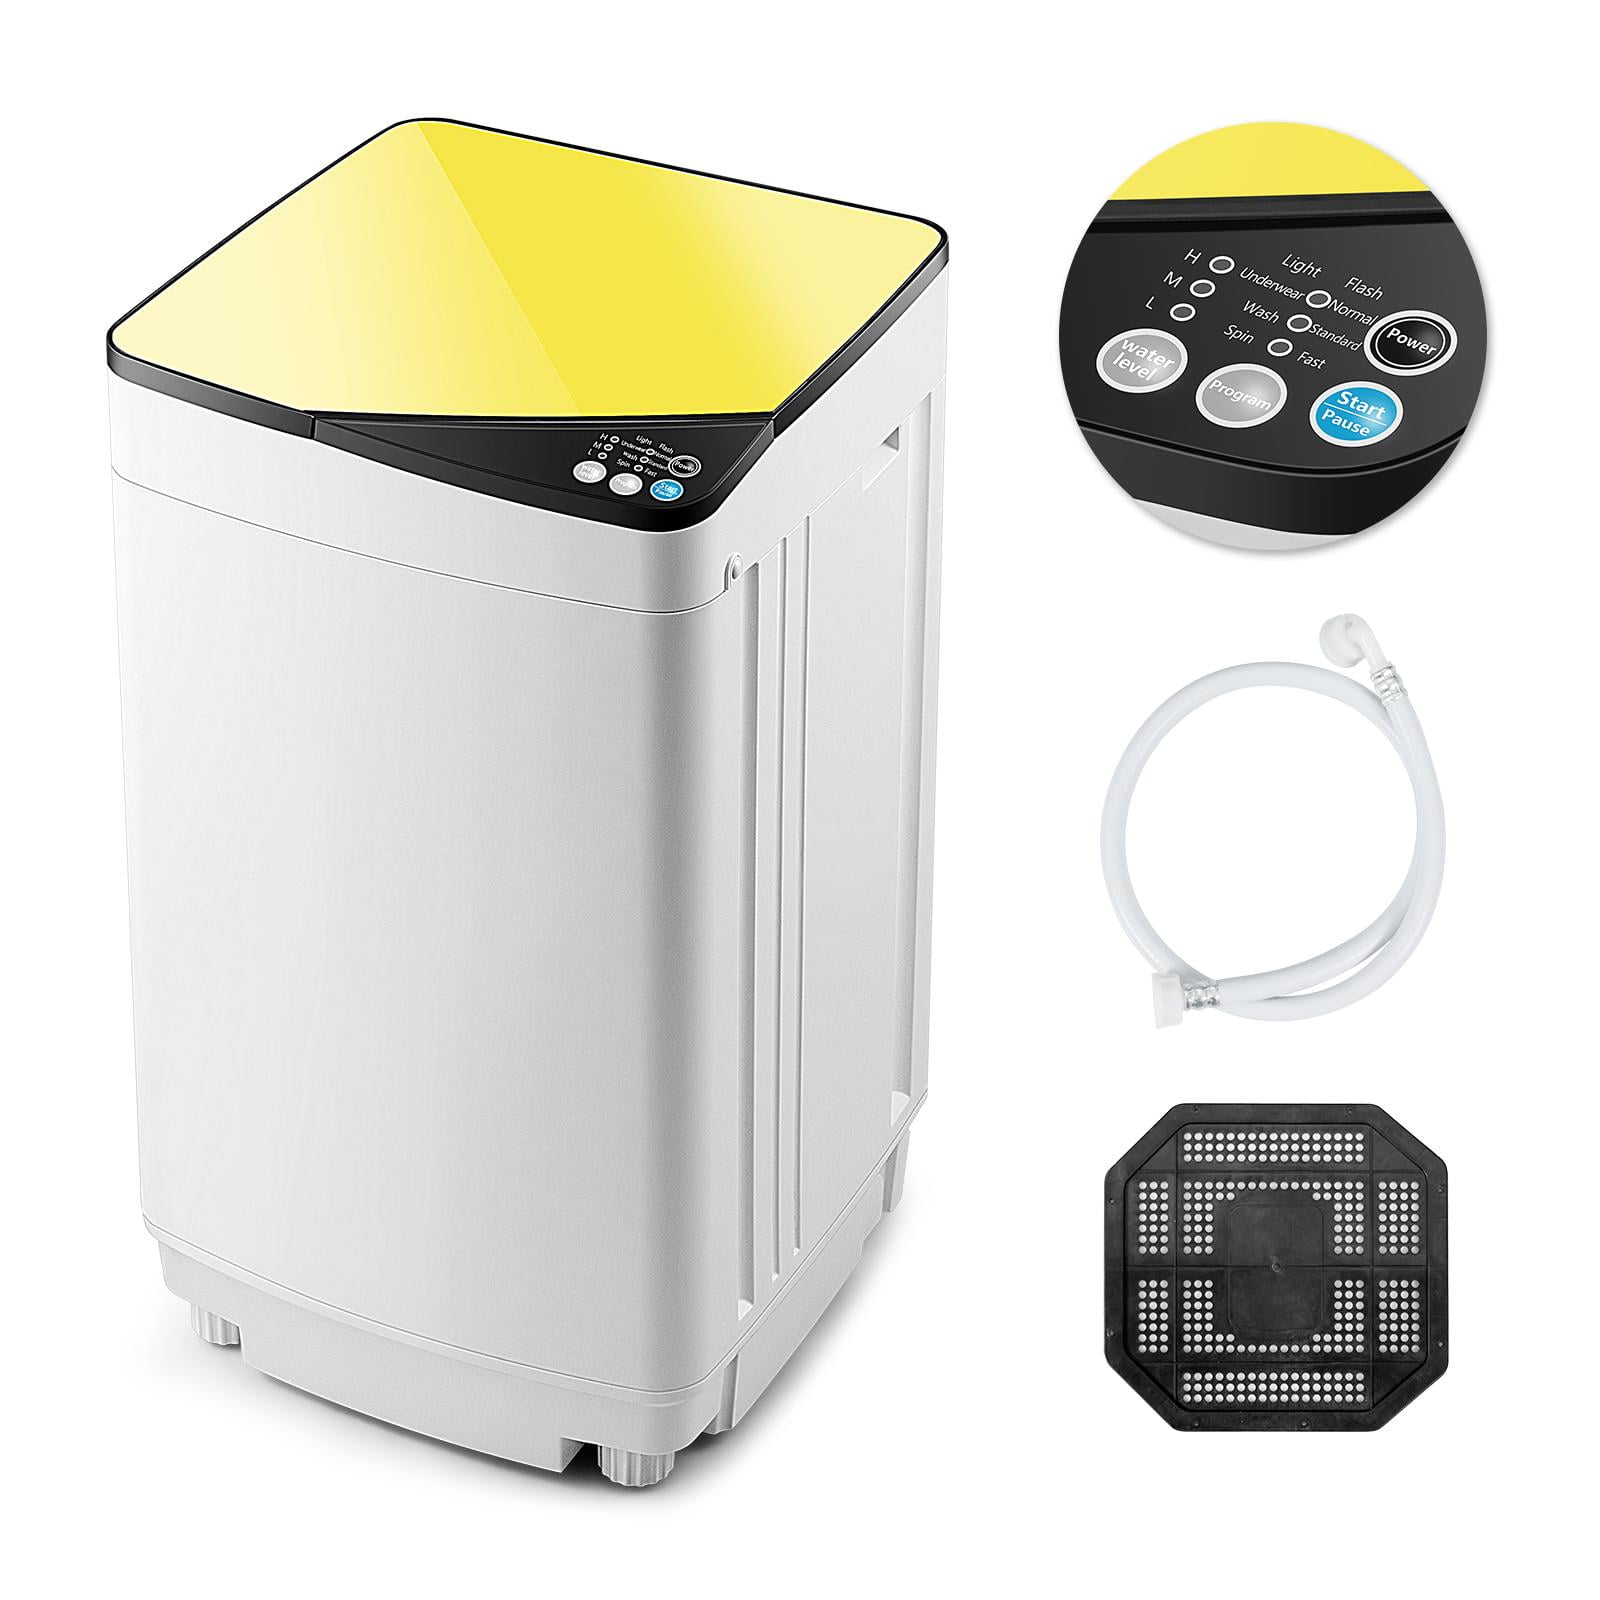 Best portable washer and dryer